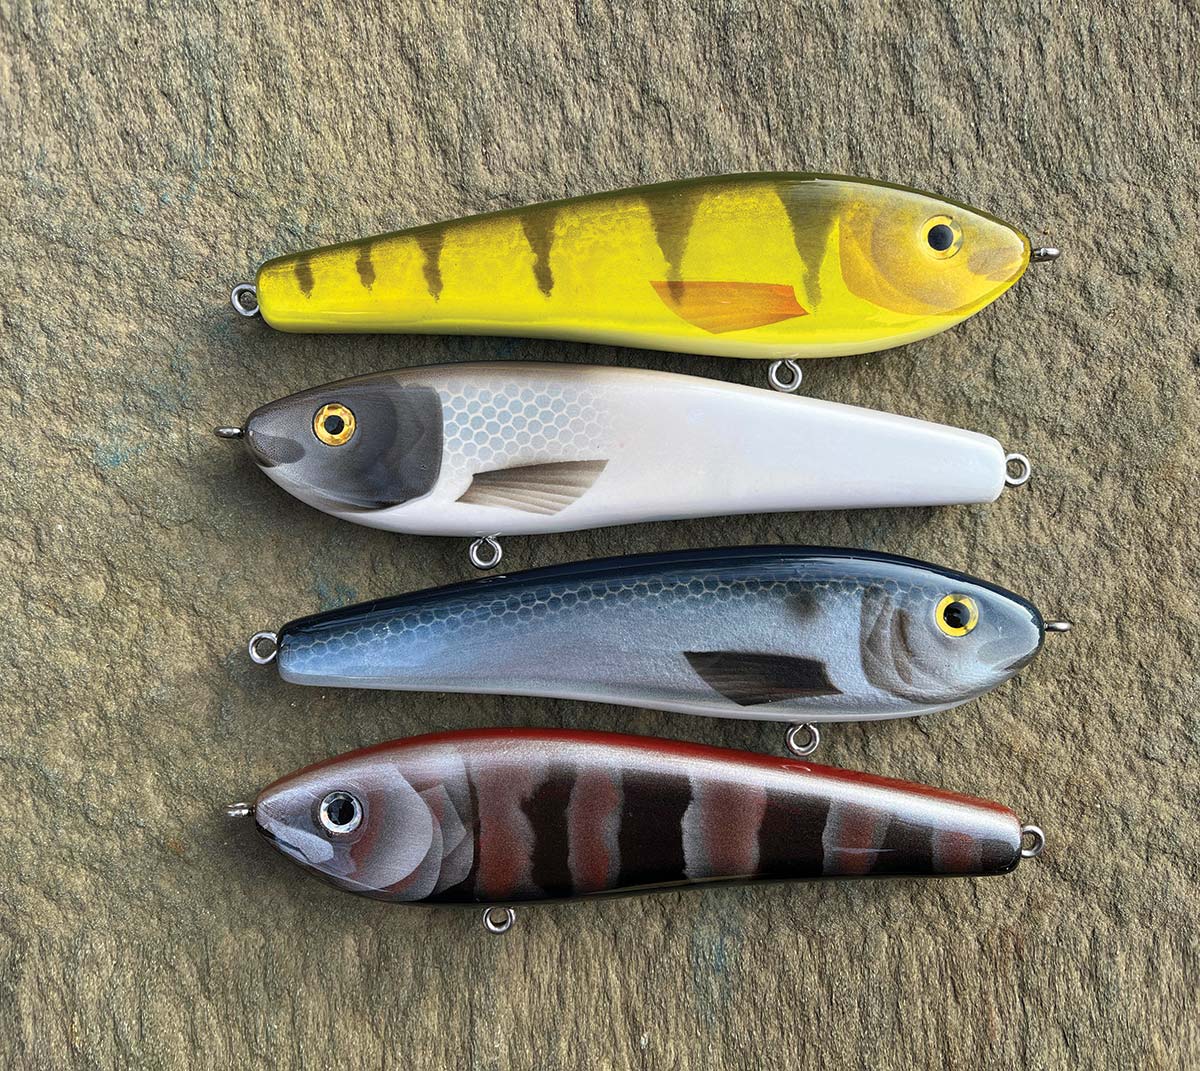 Here's some wood fishing lures I made. Carved from Western Red